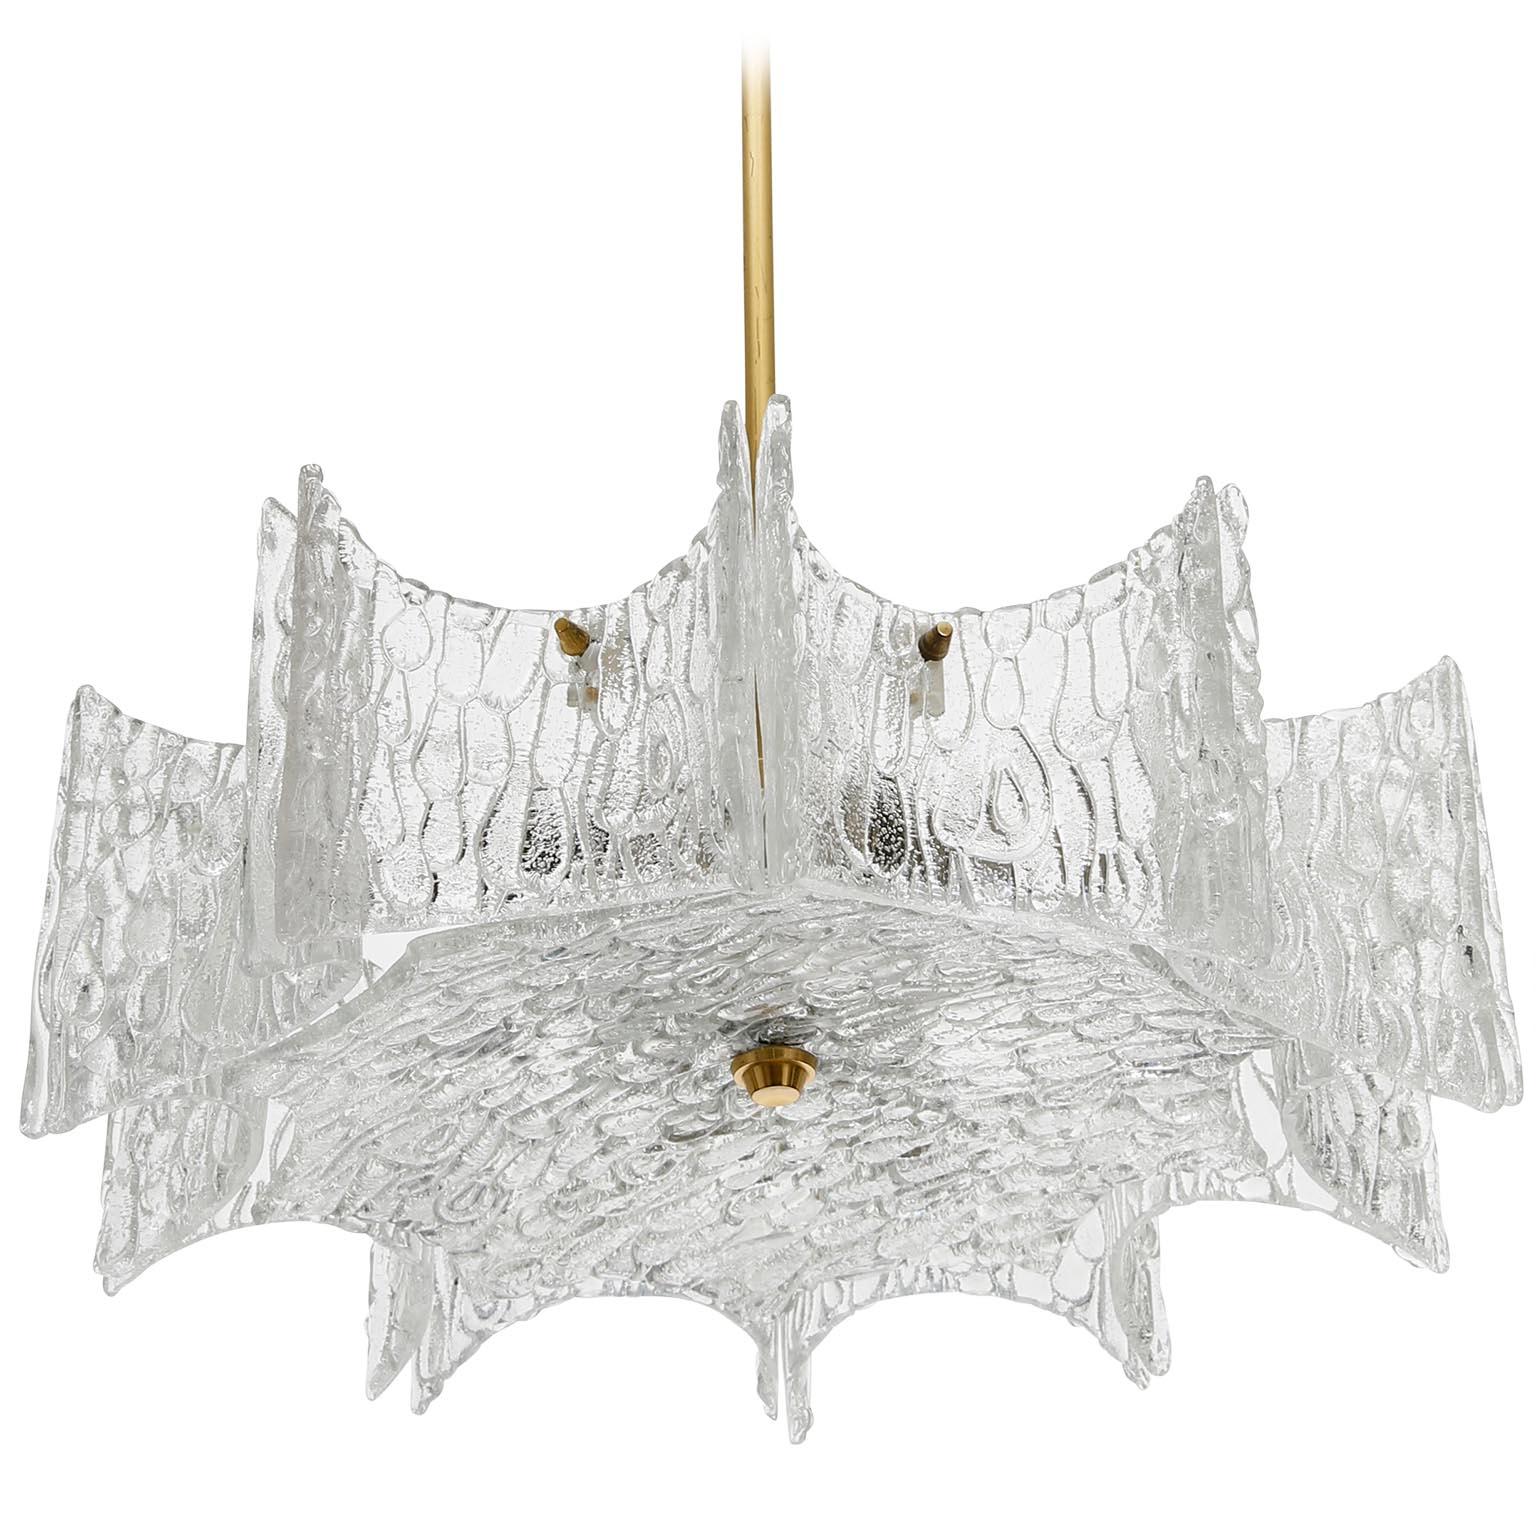 A star-shaped ceiling light by Kalmar manufactured in Austria in midcentury, circa 1970 (late 1960s or early 1970s).
The lamp is made of frosted ice glass pieces mounted on a white lacquered frame and a brass stem and canopy.
The light has been